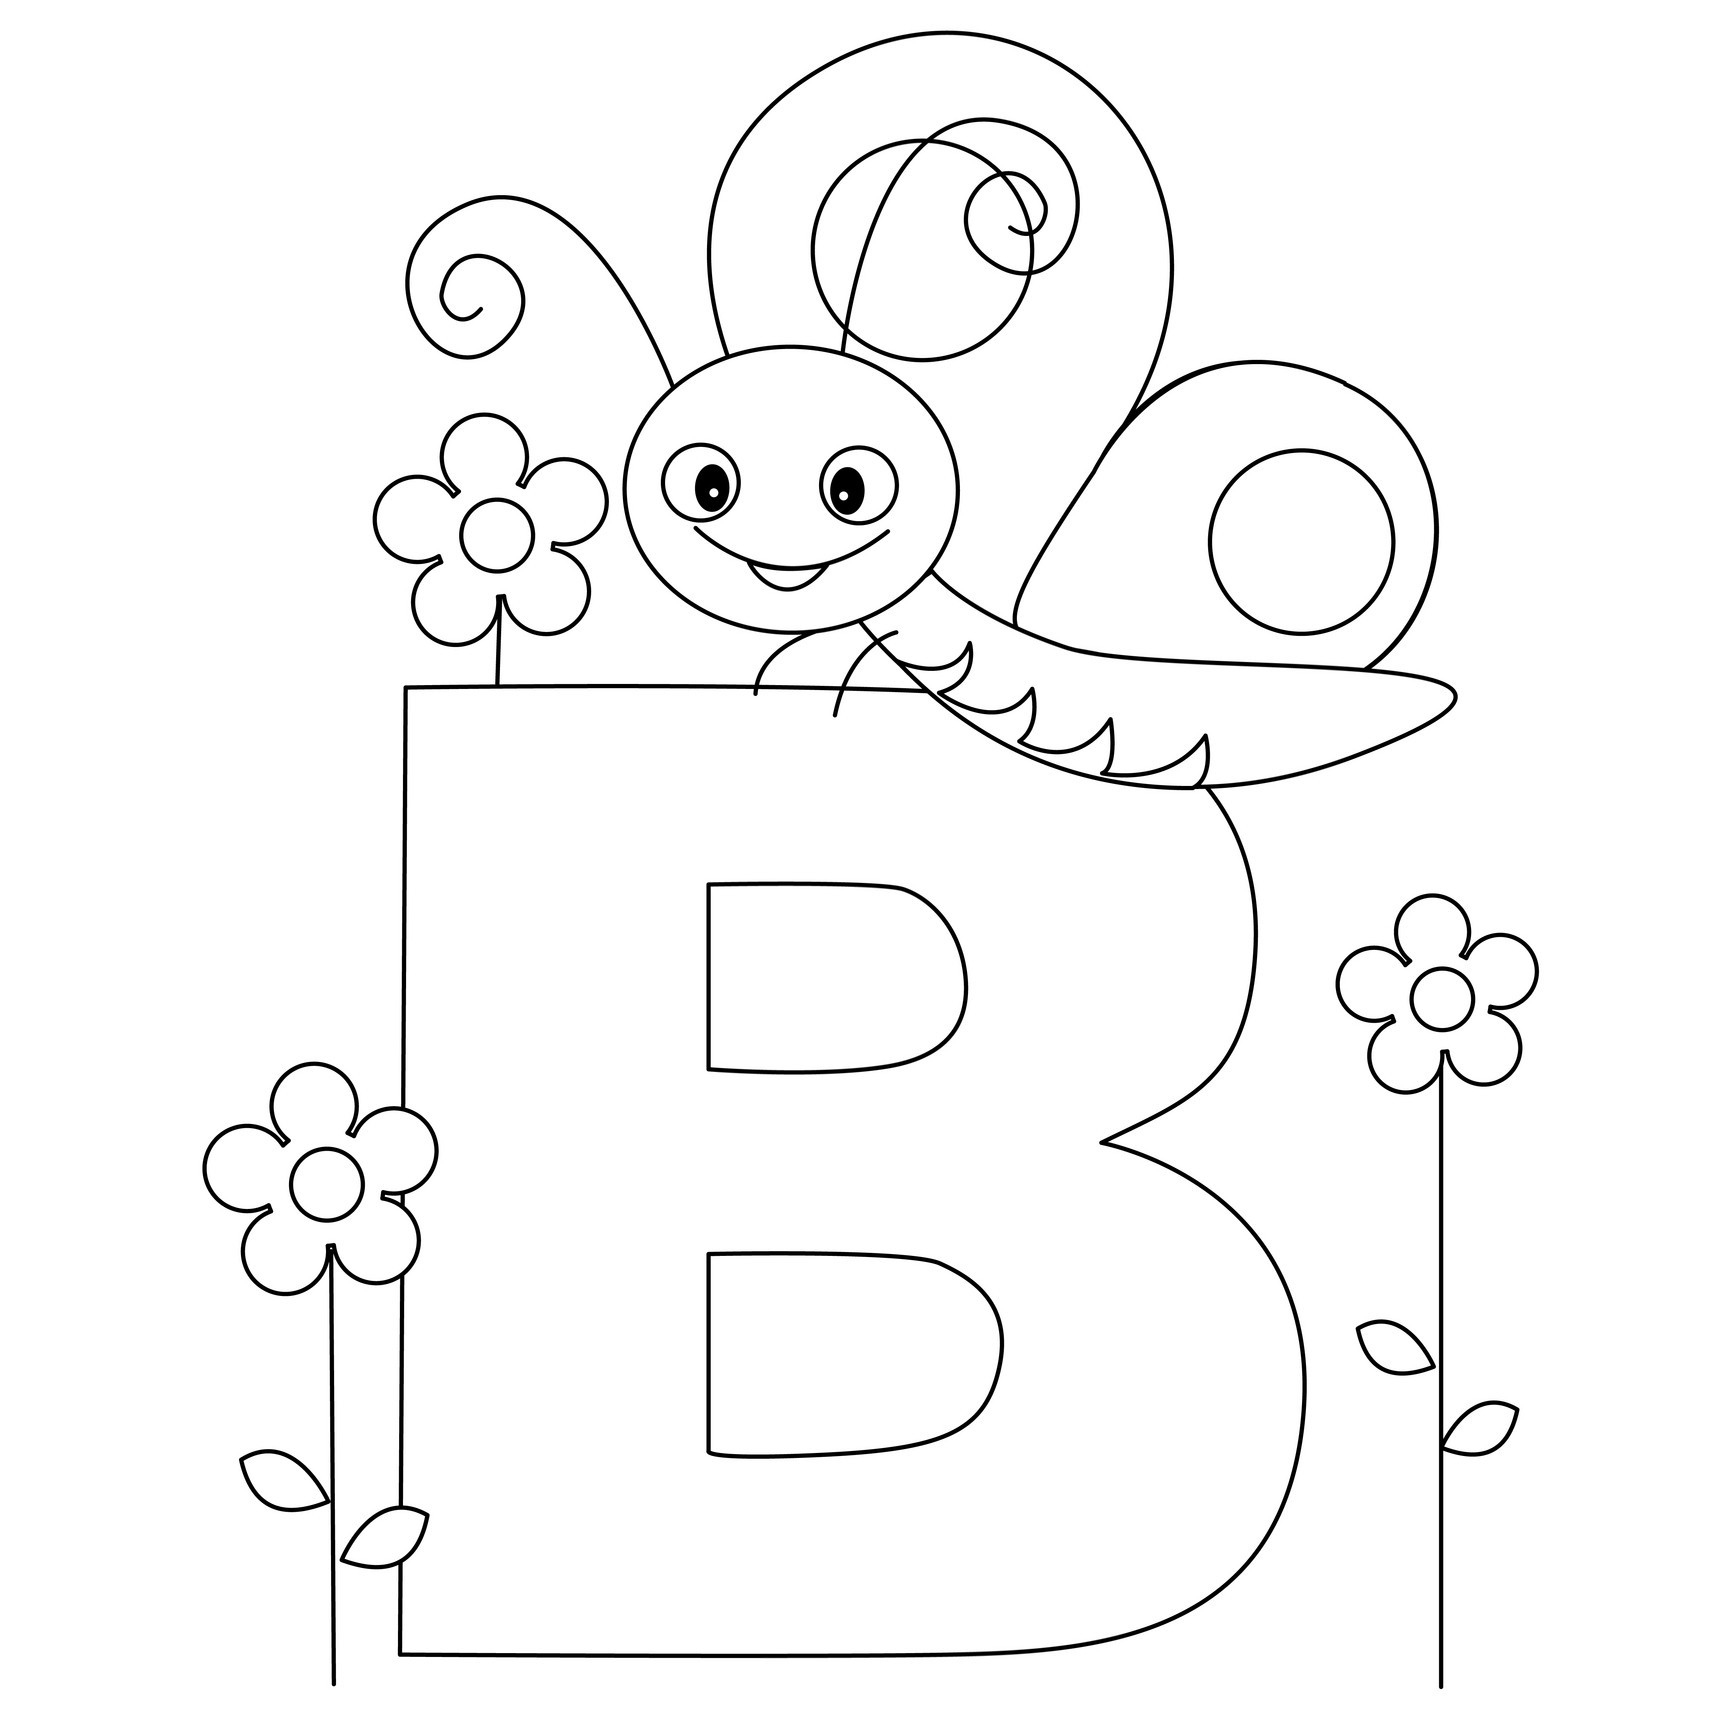 free coloring letters free printable alphabet coloring pages for kids best letters free coloring 